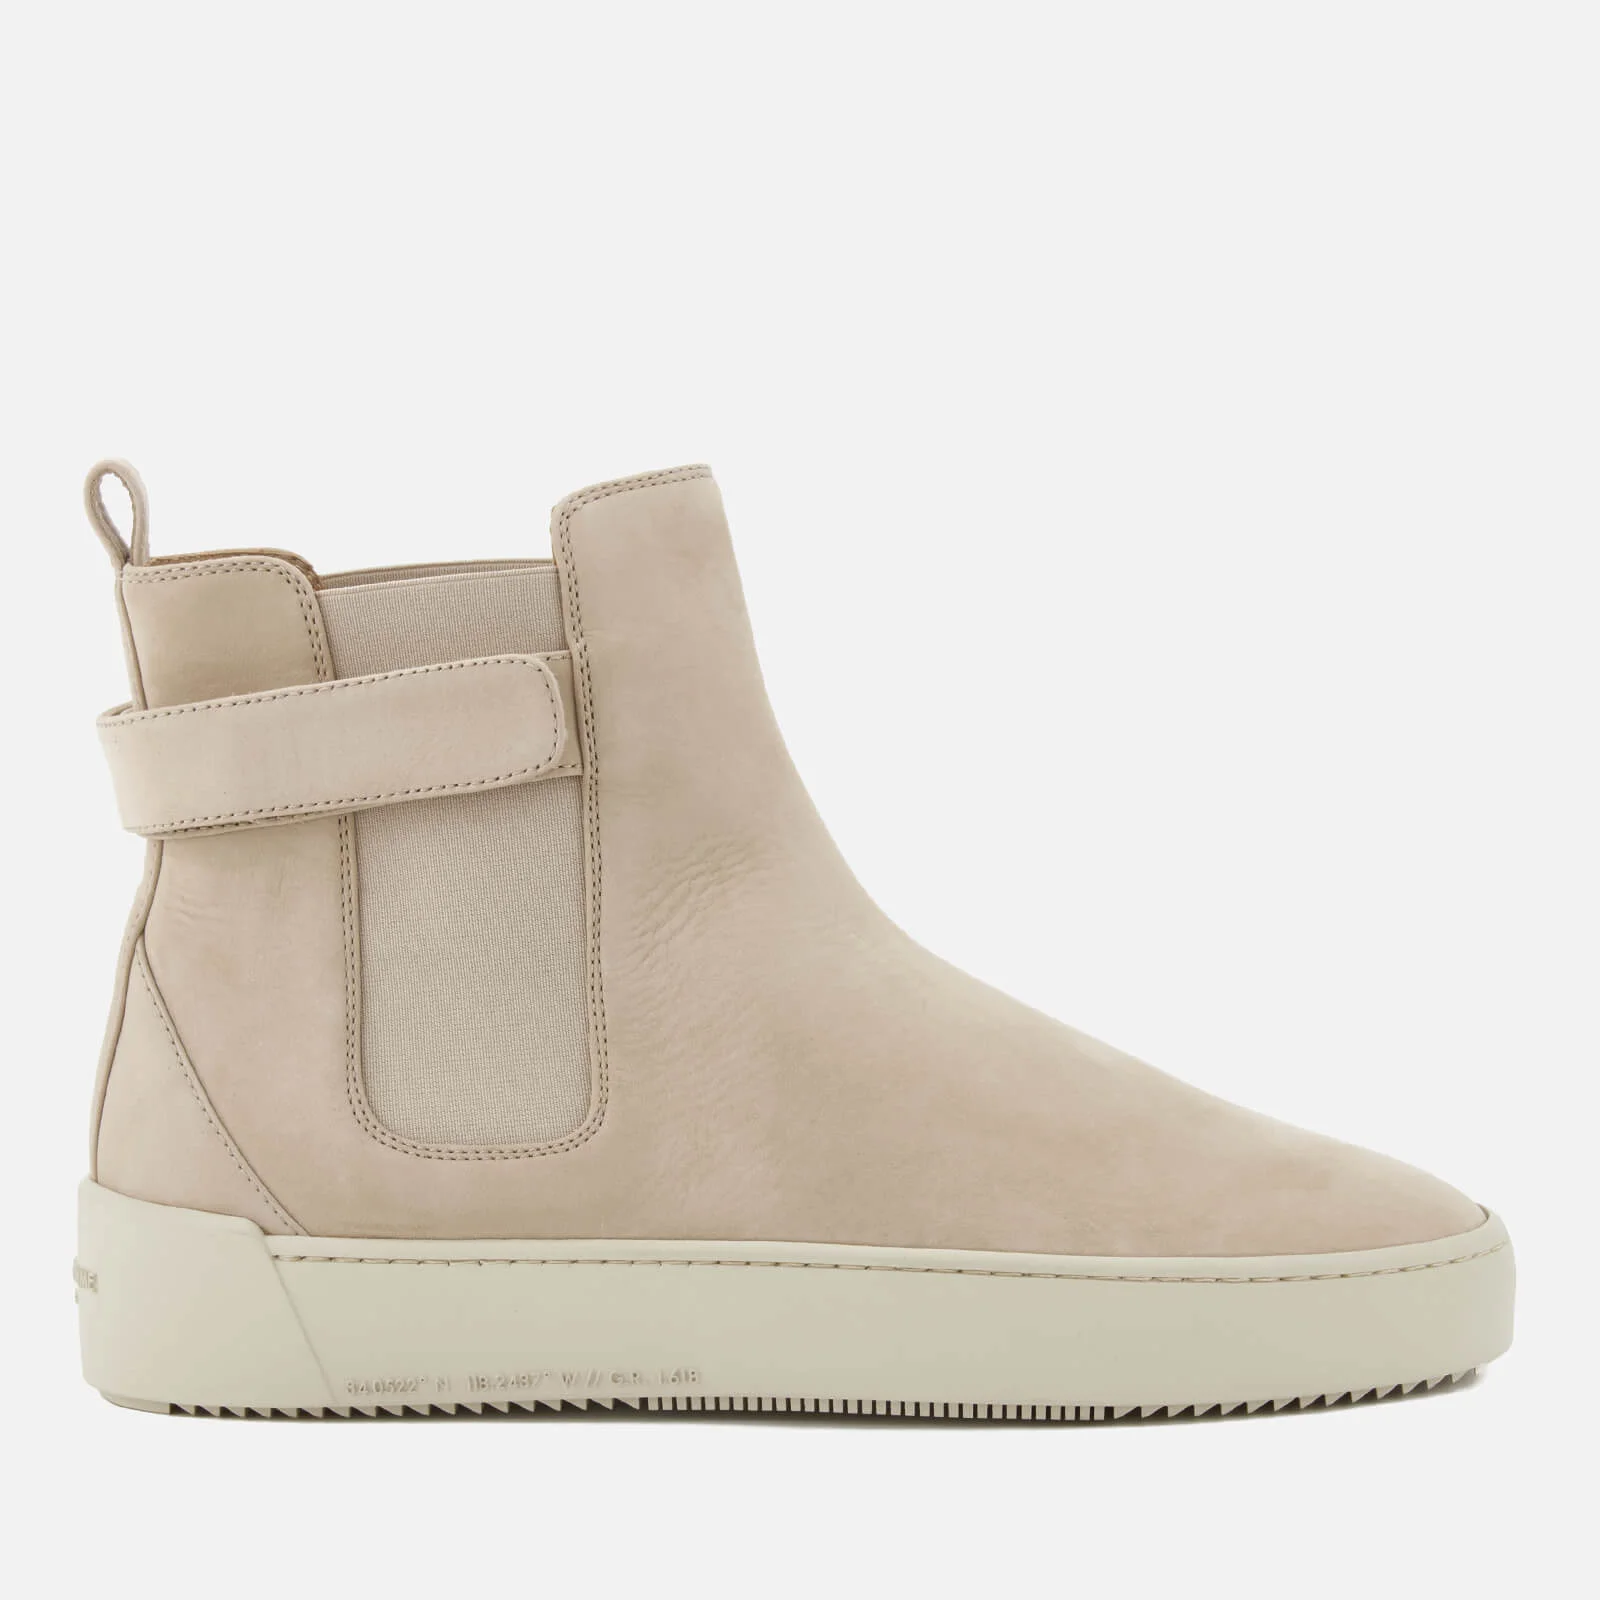 Android Homme Men's Sunset Nubuck Leather Chelsea Boots - Tan Image 1